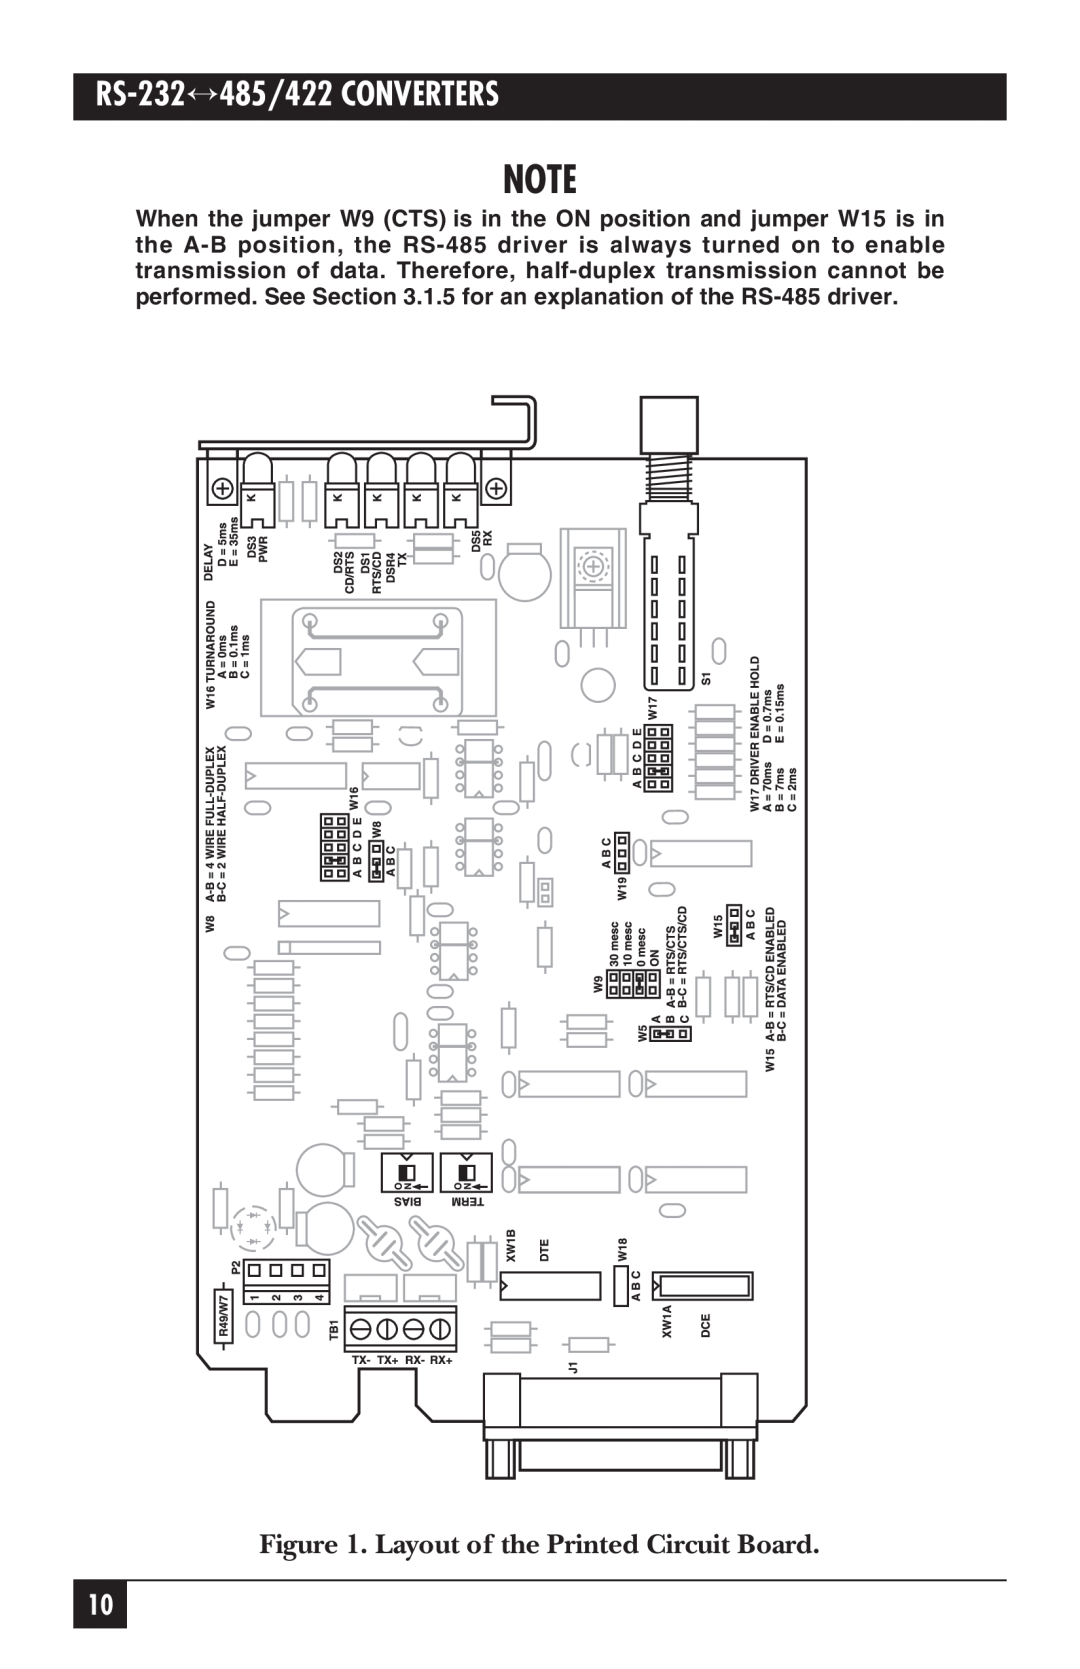 Black Box IC109C, IC108A, IC109AE, IC109A-R2, IC108C manual Layout of the Printed Circuit Board, RS-232↔485/422 CONVERTERS 